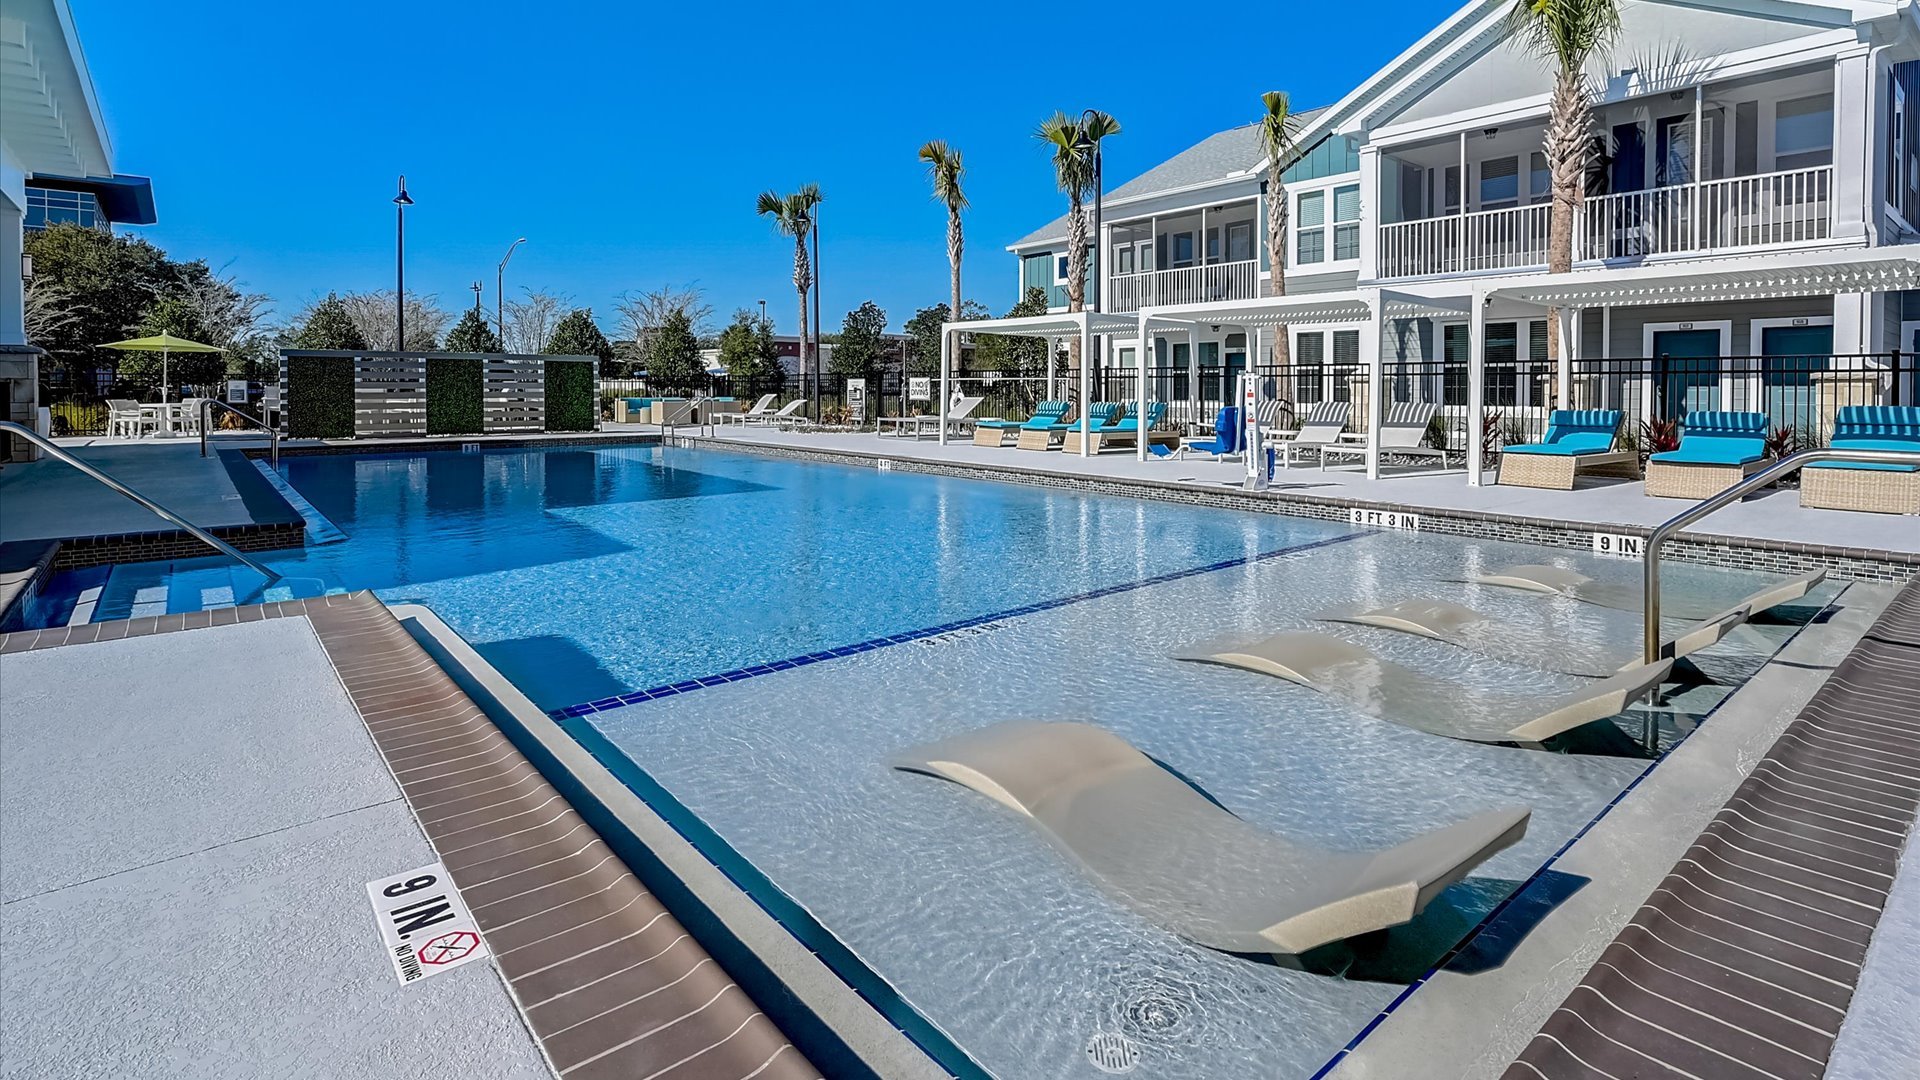 Pool Amenity with Lounge Chairs and Stunning Townhomes in the background. 